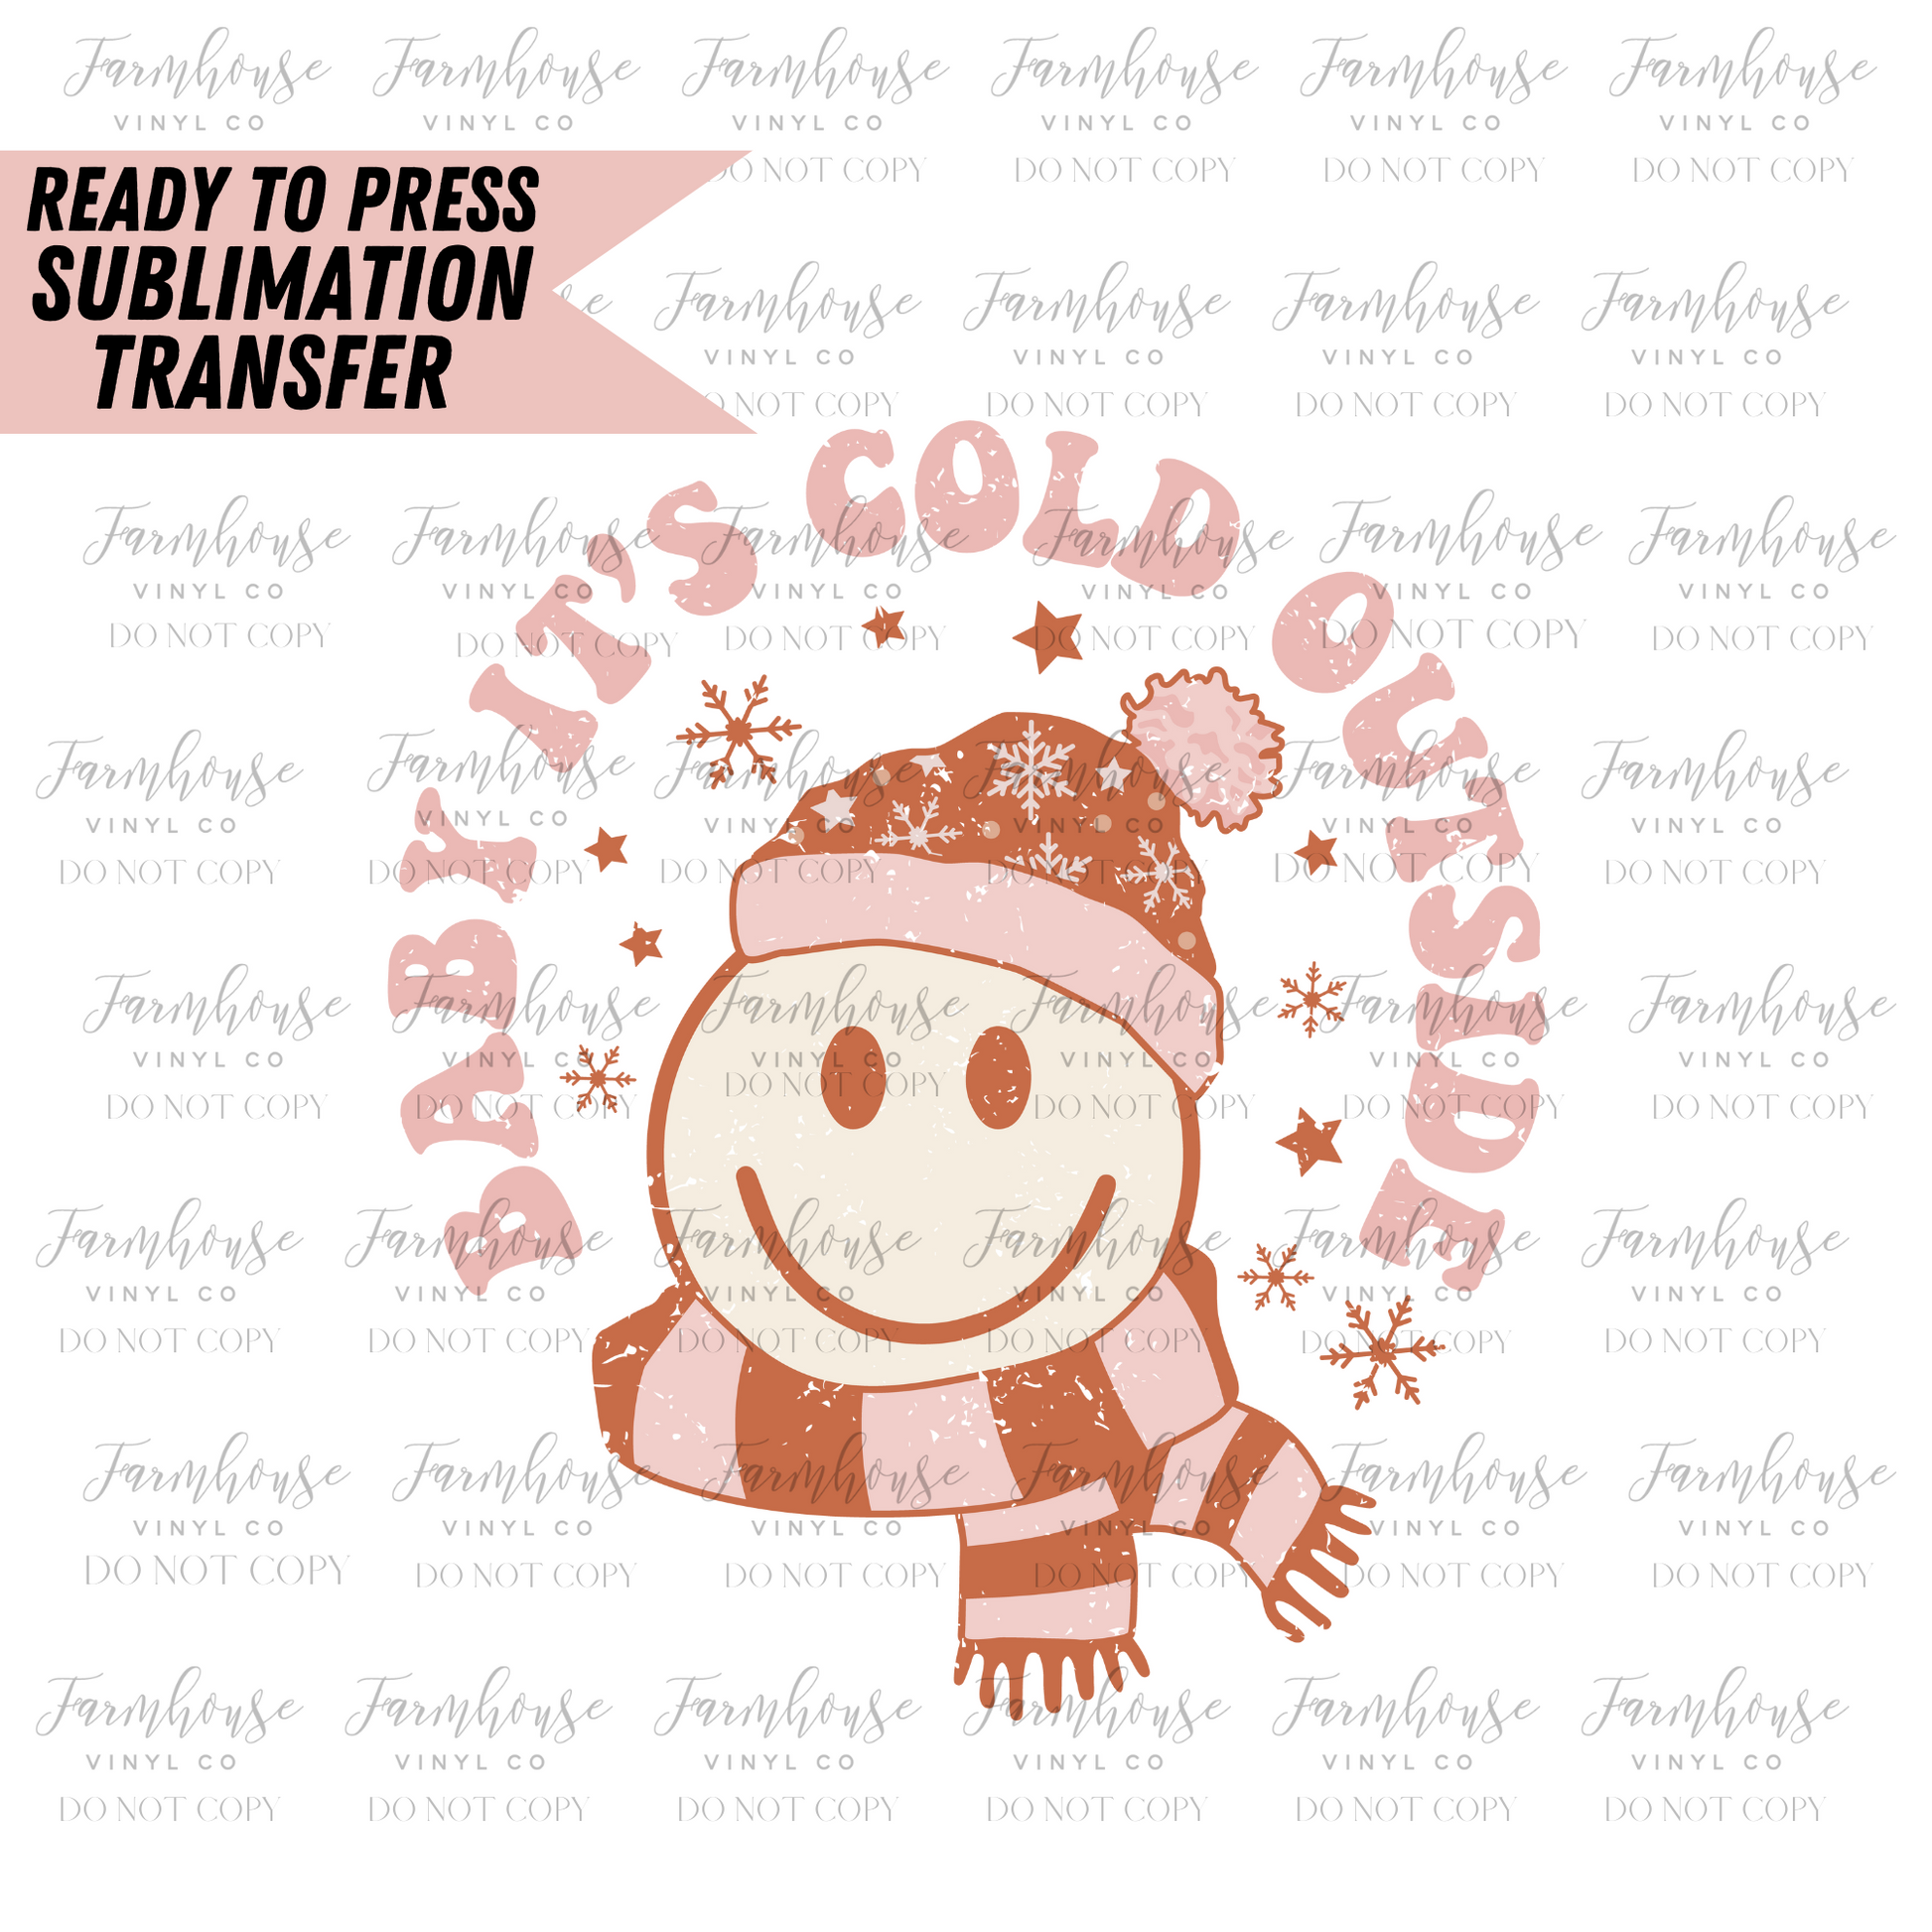 Baby Its Cold Outside Pink Retro Ready To Press Sublimation Transfer - Farmhouse Vinyl Co